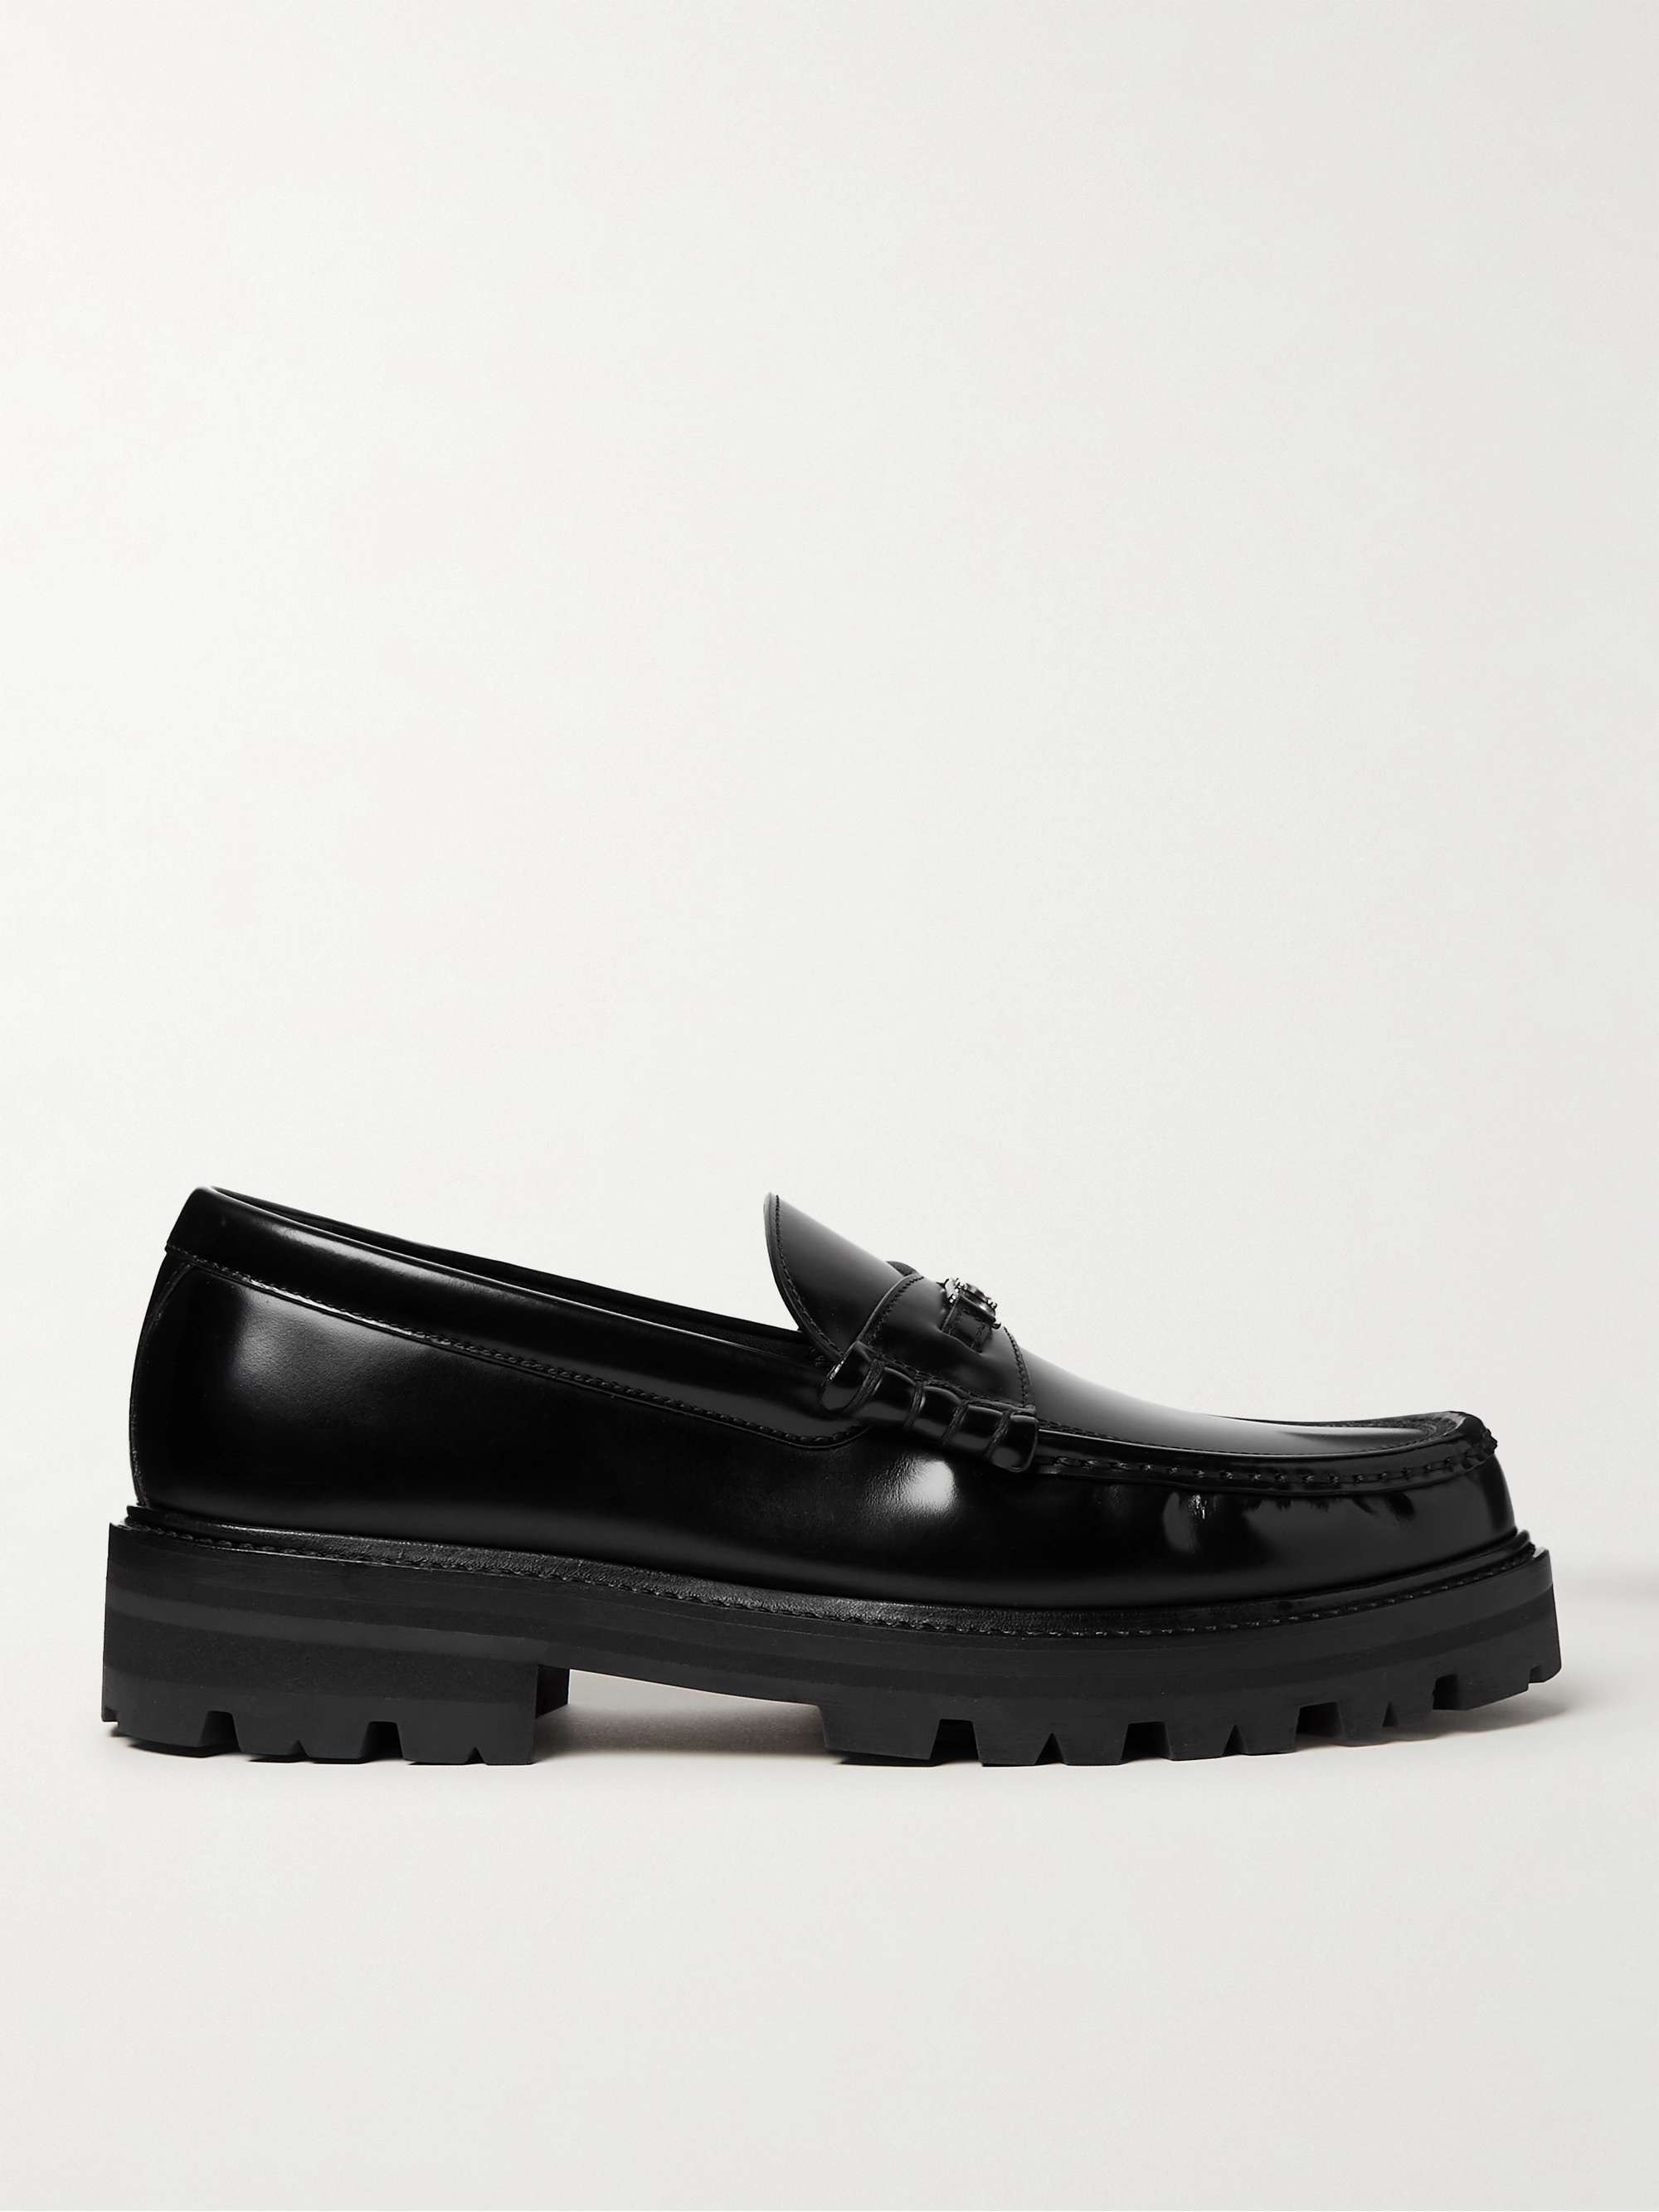 CELINE HOMME Triomphe Leather Loafers